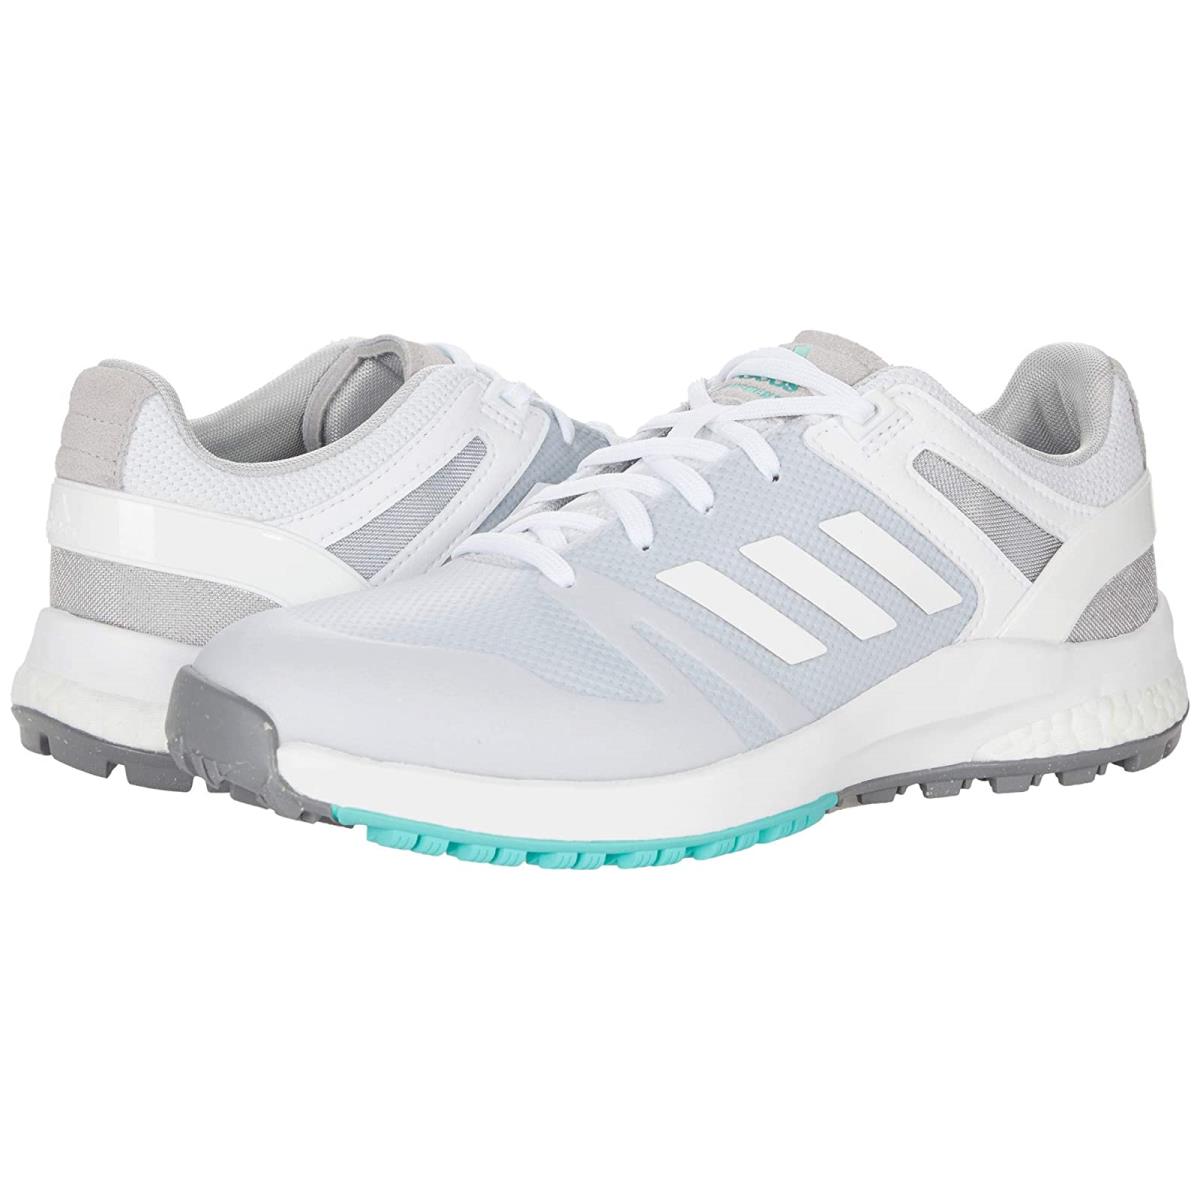 Woman`s Sneakers Athletic Shoes Adidas Golf Eqt SL White/White/Acid Mint